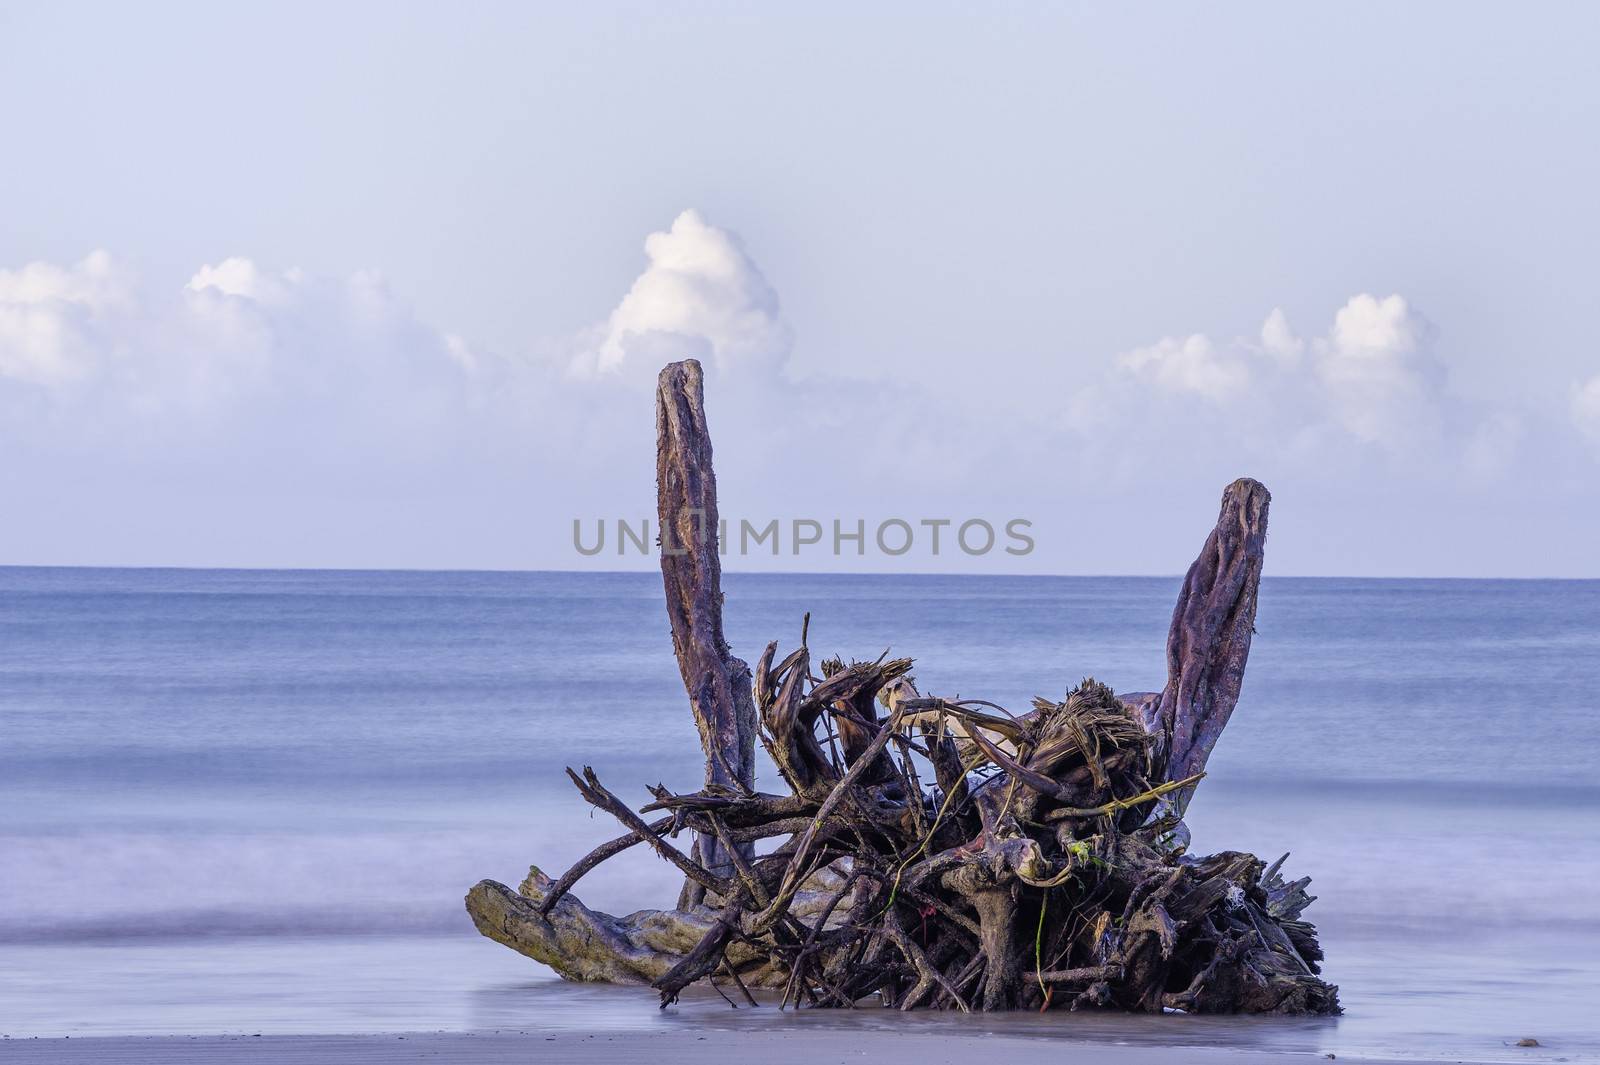 Driftwood photographed in the soft early dawn light.